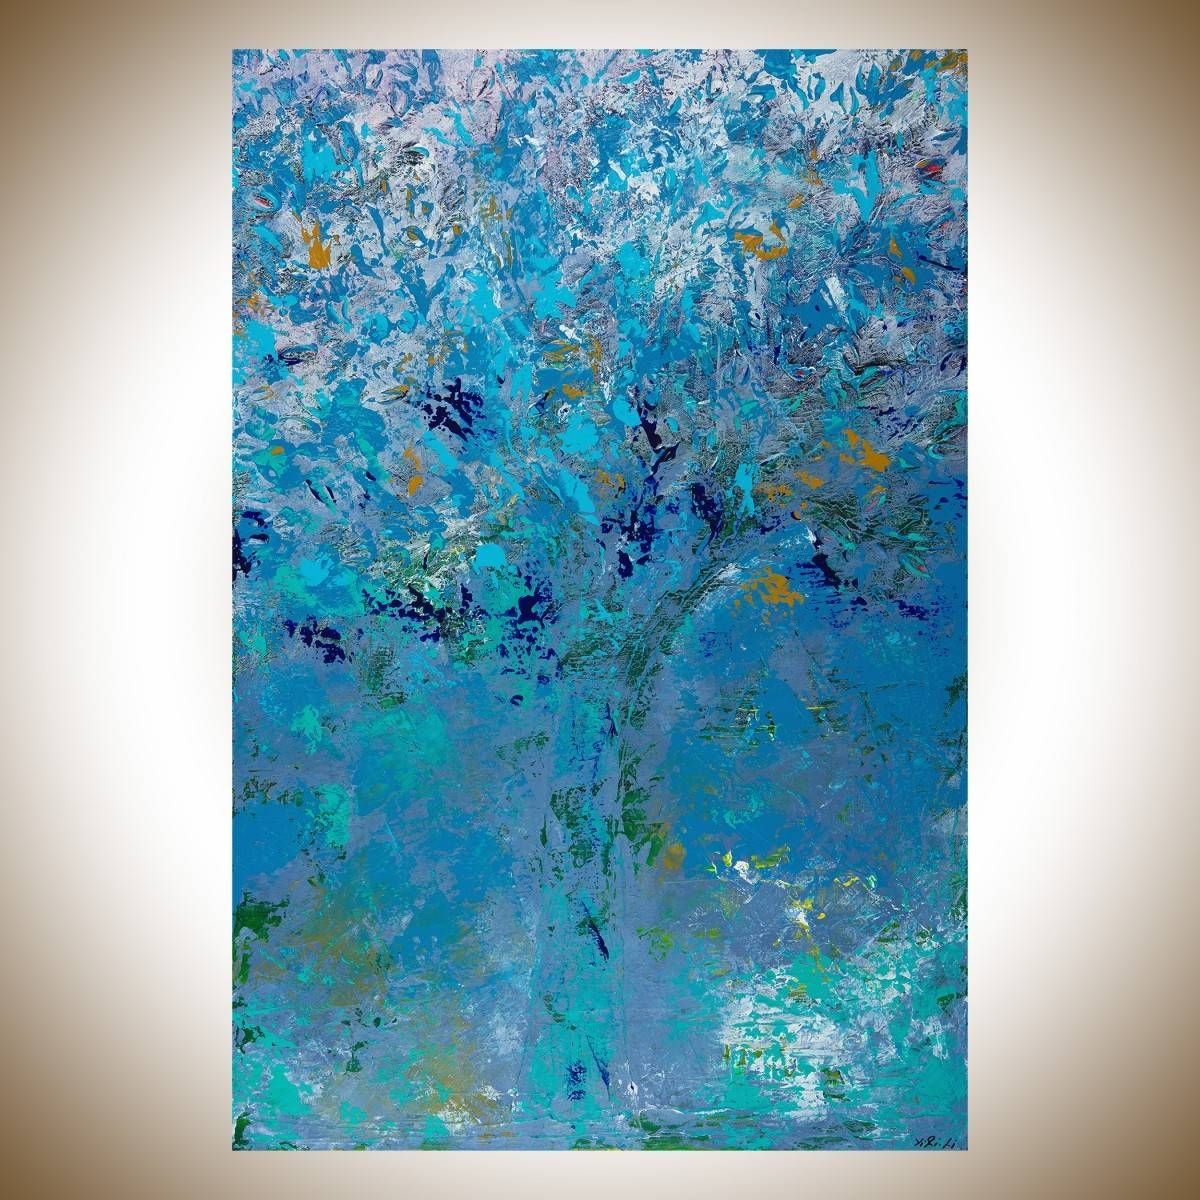 First Snowfallqiqigallery 36"x24" Original Modern Contemporary Within Latest Blue And White Wall Art (View 7 of 20)